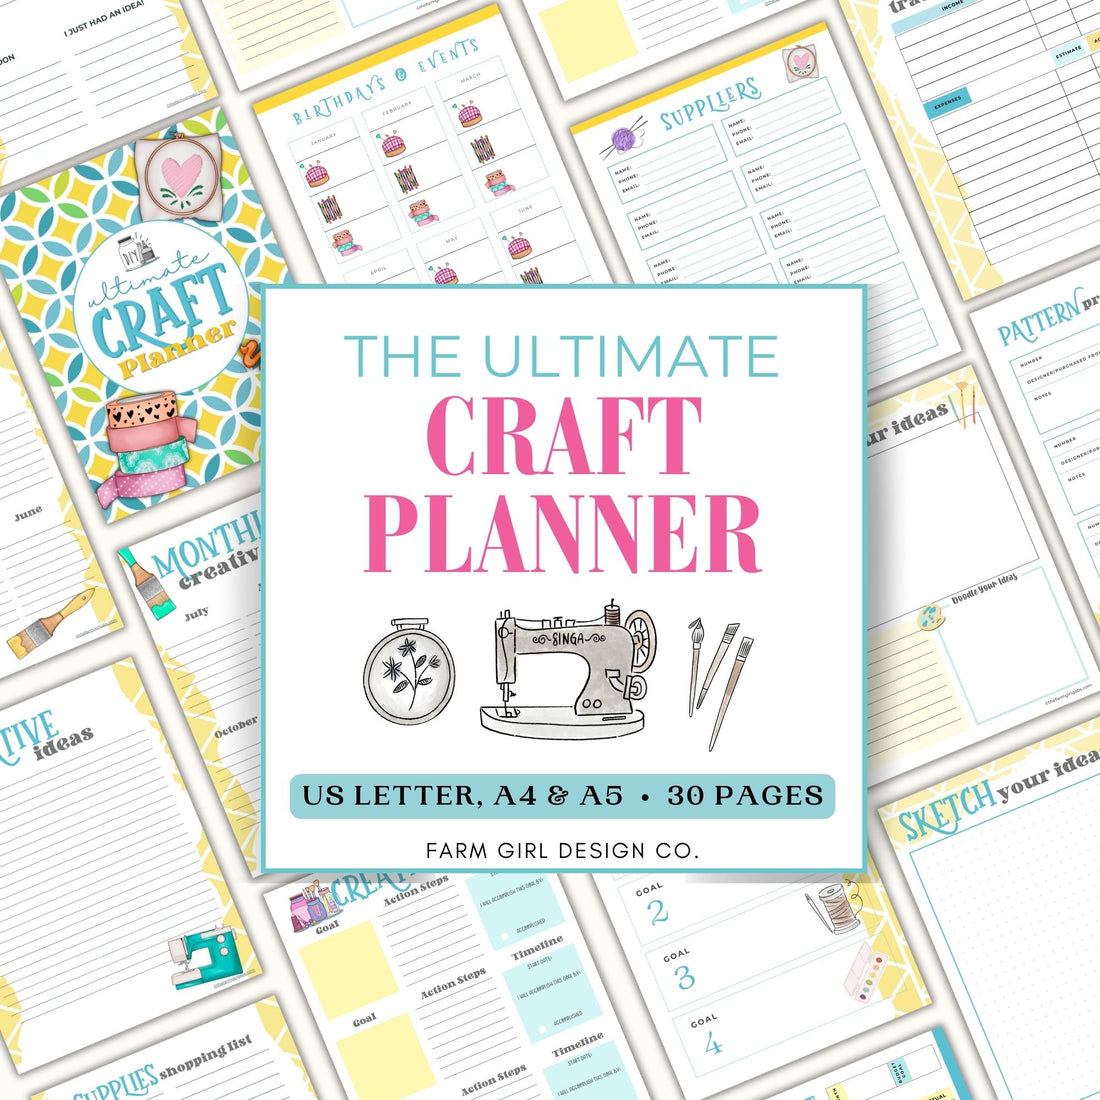 This 30-page printable Craft project planner PDF is perfect for hobby crafters and professional crafters. This craft project binder contains pages to organize your craft projects, craft supplies, ideas, inventory, budget and more. Plan your craft projects quickly with this printable planner. 